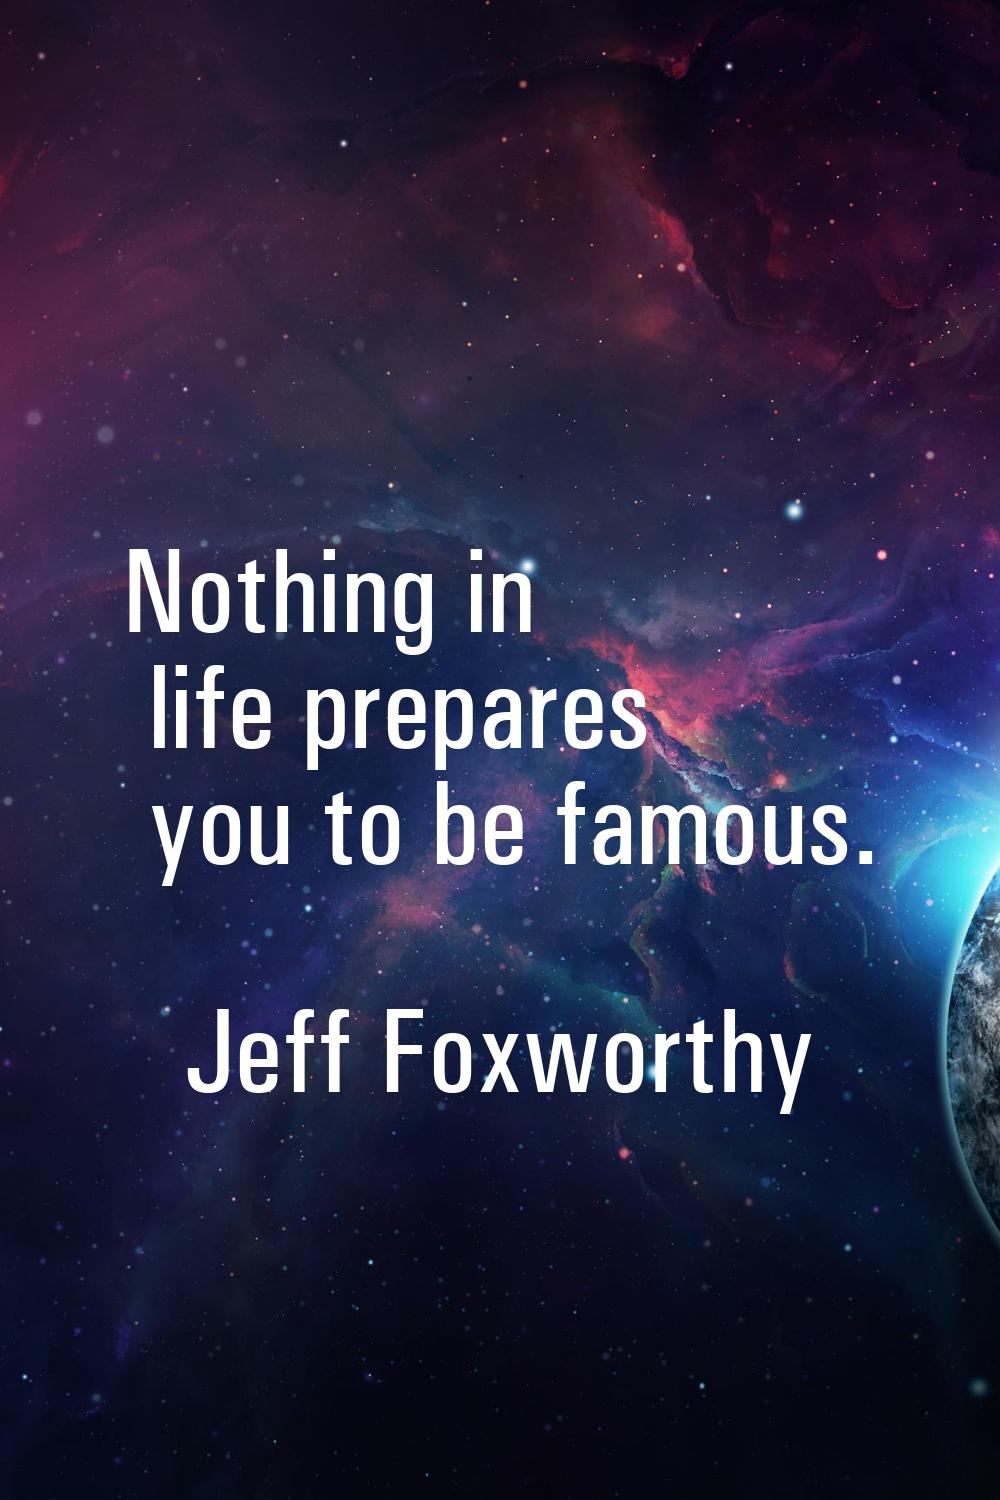 Nothing in life prepares you to be famous.